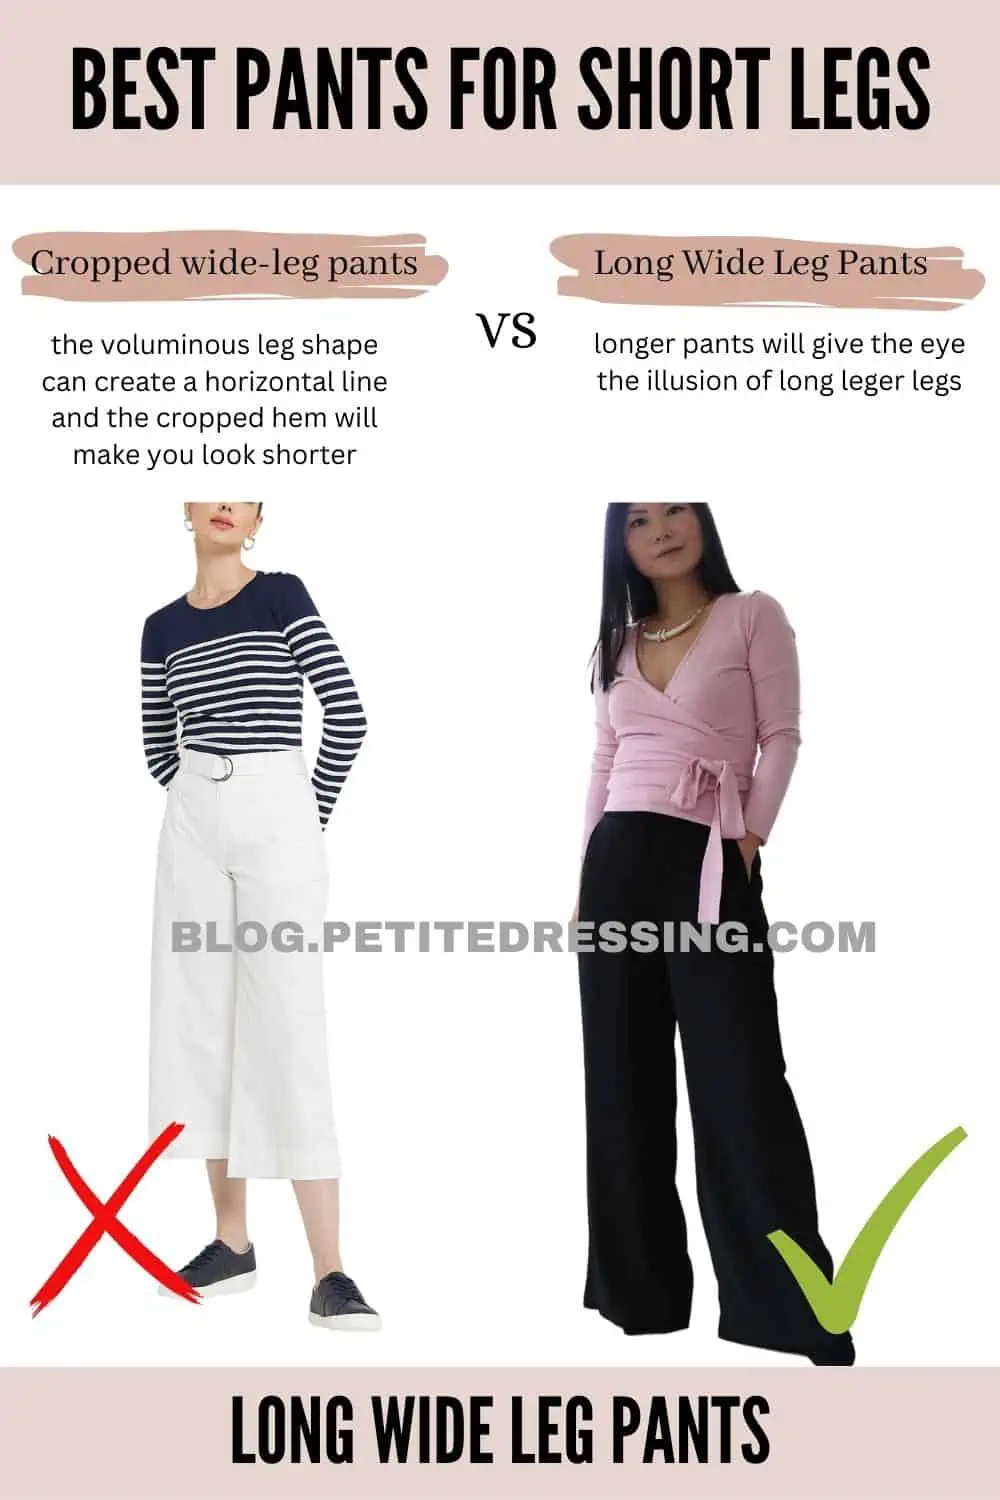 NEVER wear these 5 types of pants if you have short legs like me